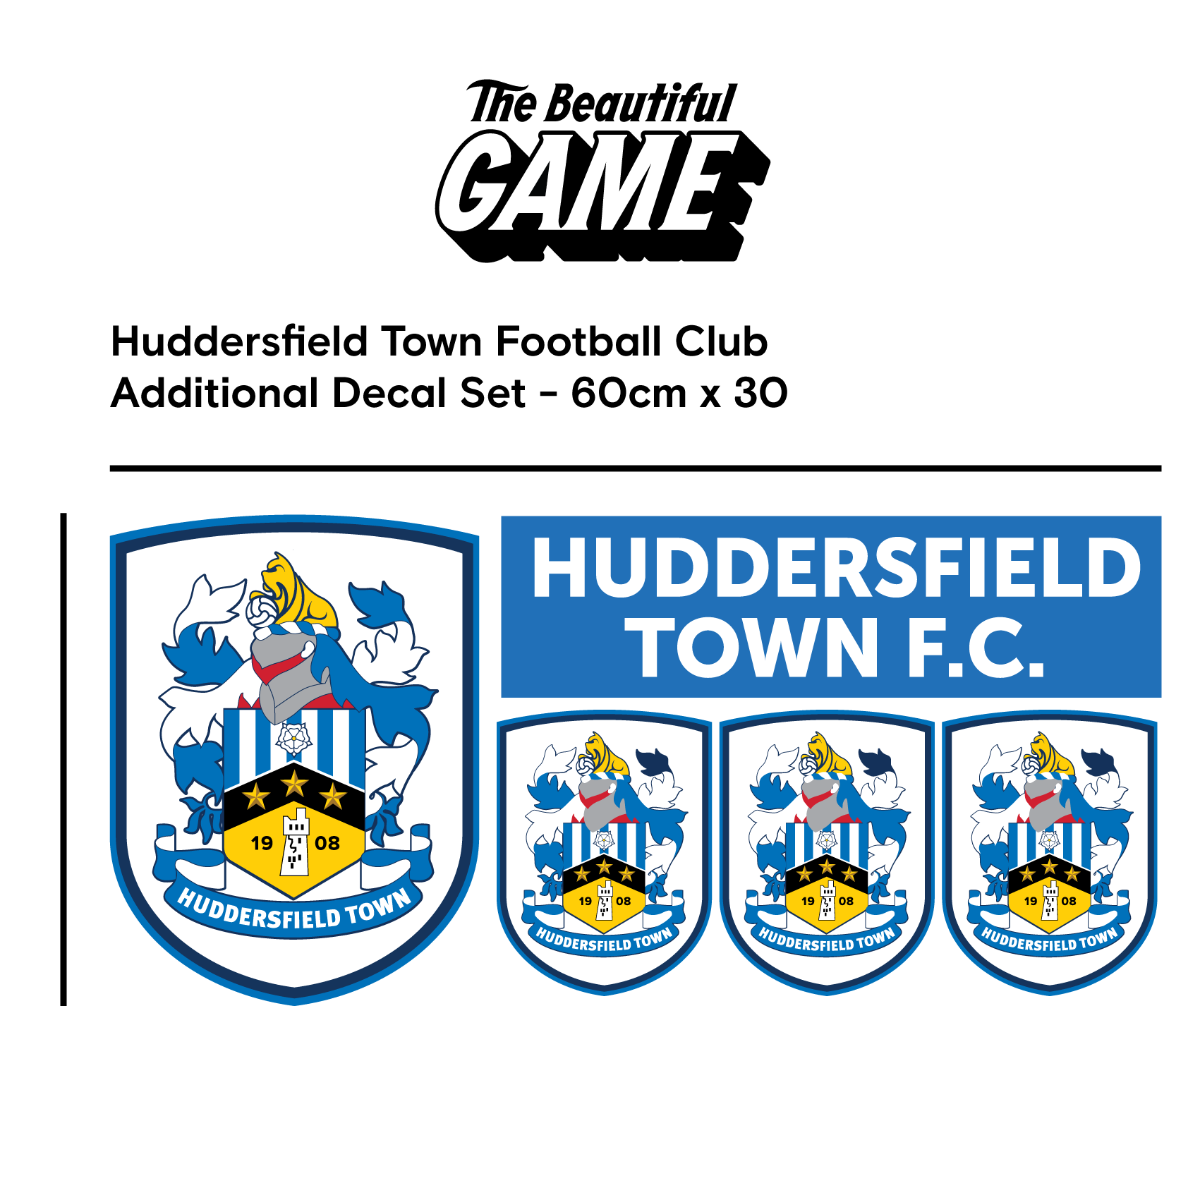 Huddersfield Town Football Club - Crest & Personalised Name + Terriers Wall Sticker Set